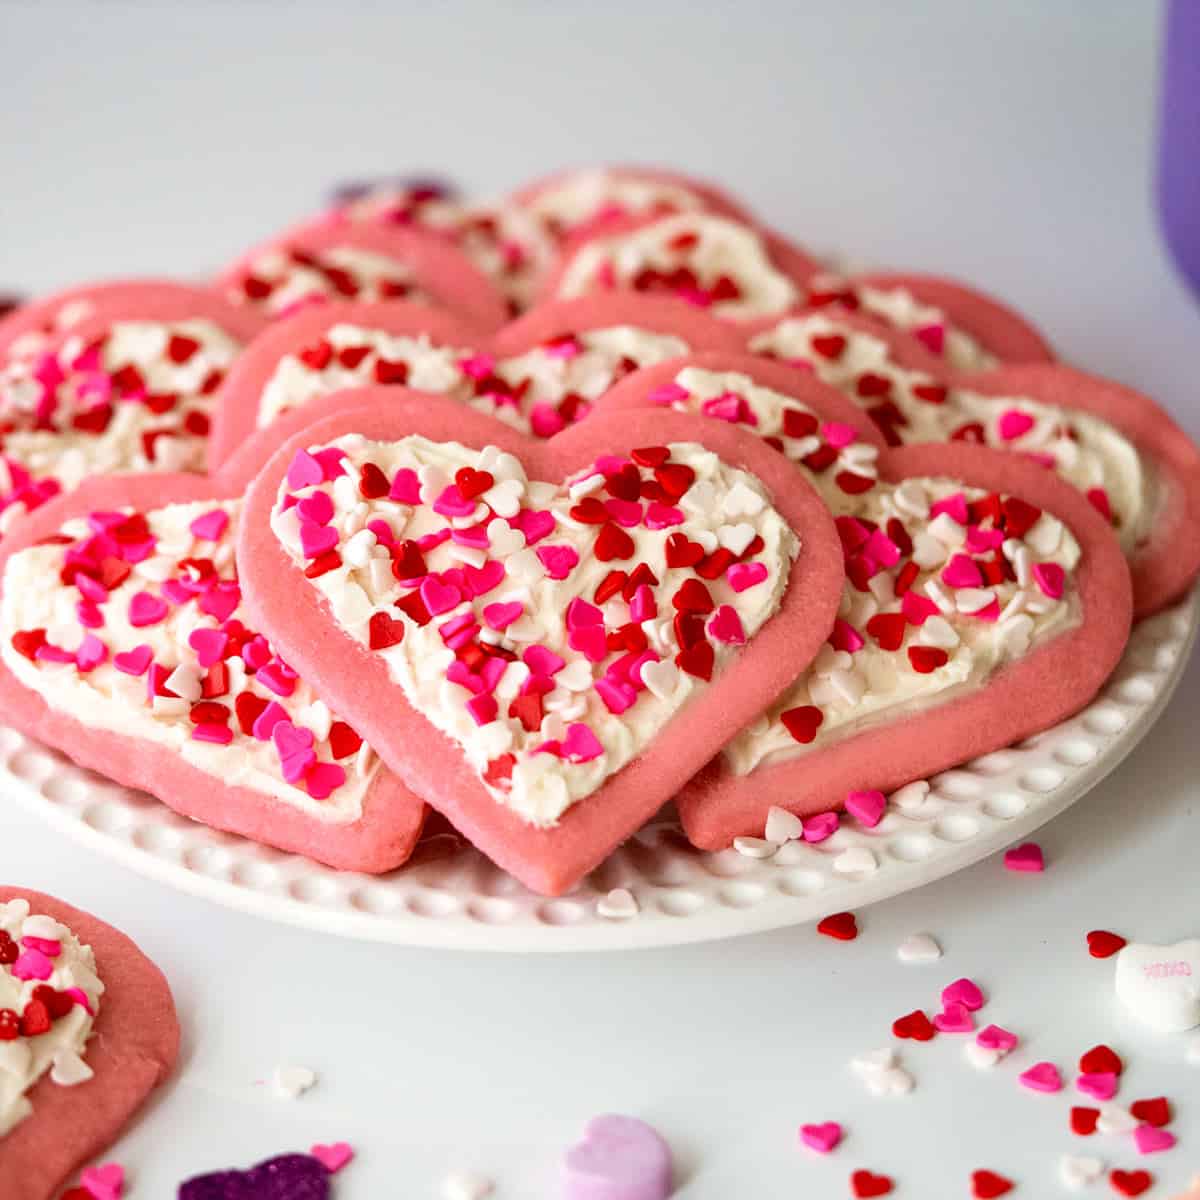 Heart Sugar Cookies with Buttercream Icing - My Cookie Journey